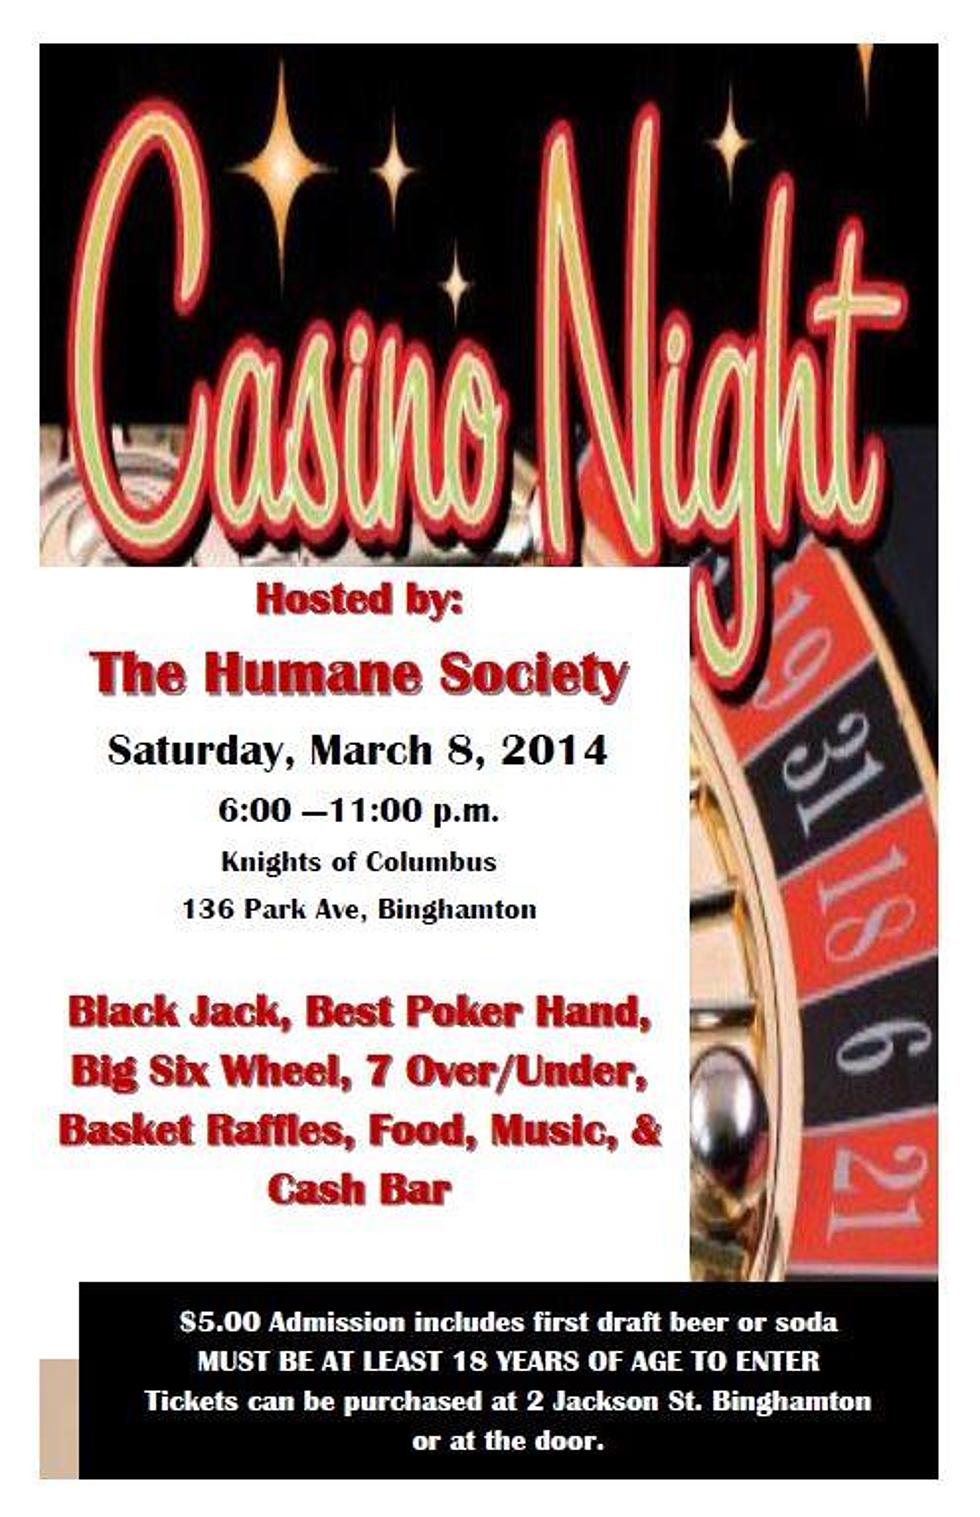 Great Turn Out The Broome County Humane Society’s Casino Night